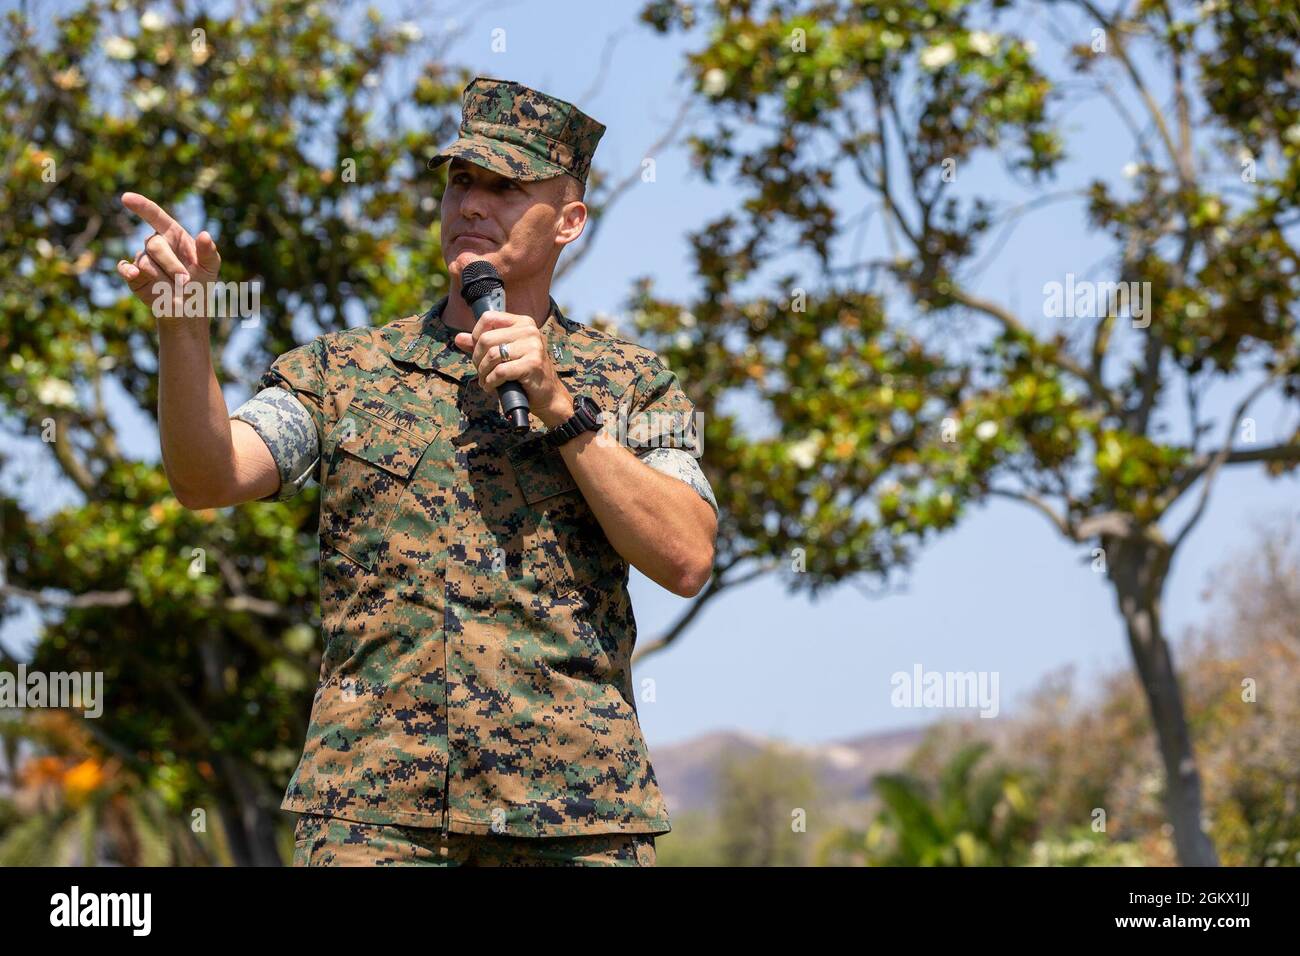 U.S. Marine Col. John Black, the incoming commander of Security and Emergency Services Battalion, Marine Corps Base Camp Pendleton, speaks during a change of command ceremony at the Santa Margarita Ranch House on Camp Pendleton, California, July 14, 2021. During the ceremony, Col. Edward Greeley, the outgoing commander of SES Bn., relinquished command to Black. Greeley had been the commander of SES Bn. since July 2019. Stock Photo